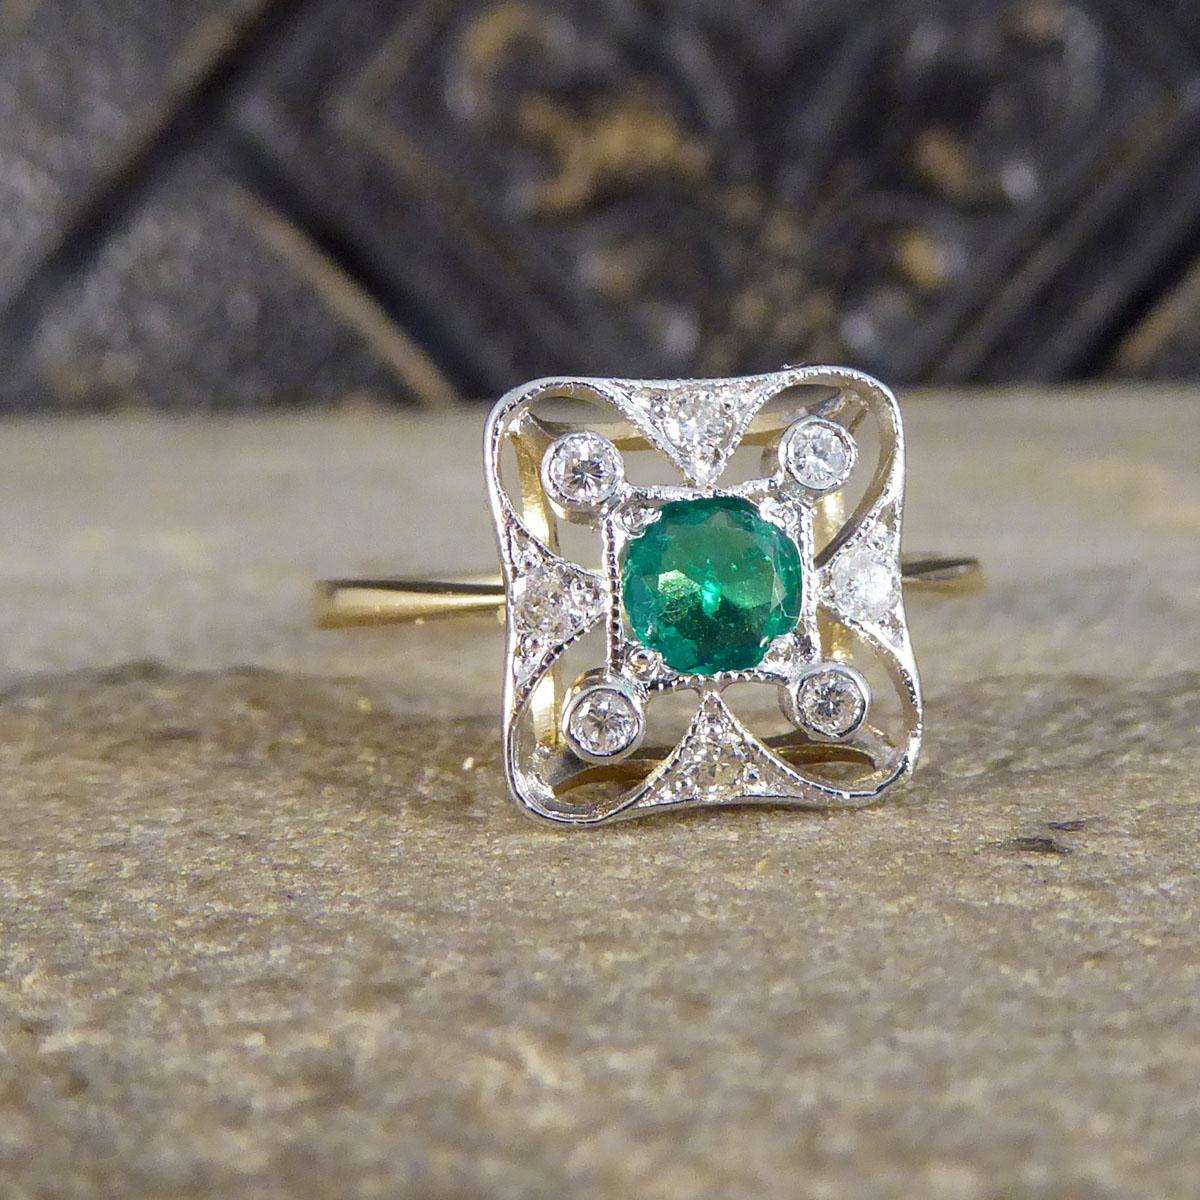 This contemporary ring has been crafted to resemble an Art Deco style with a decorative head adorned with Diamonds. It is light weight and features a single gorgeous green Emerald in the centre weighing 0.25ct surrounded by an Art Deco inspired